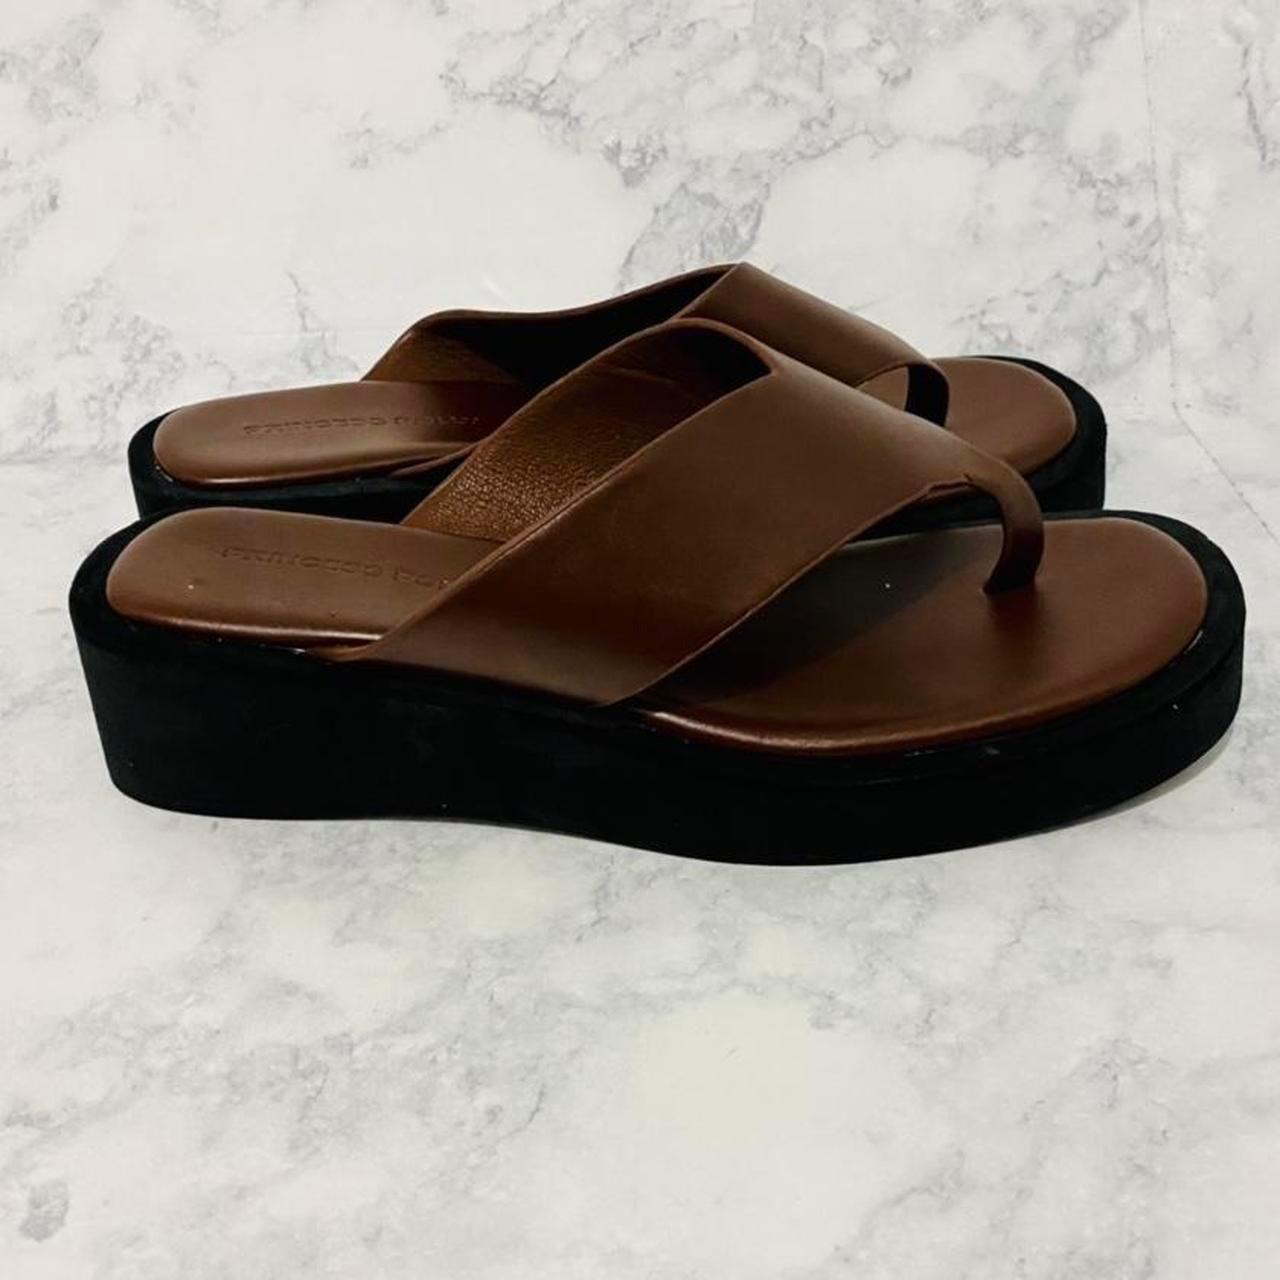 Princess Polly Women's Brown and Black Sandals | Depop